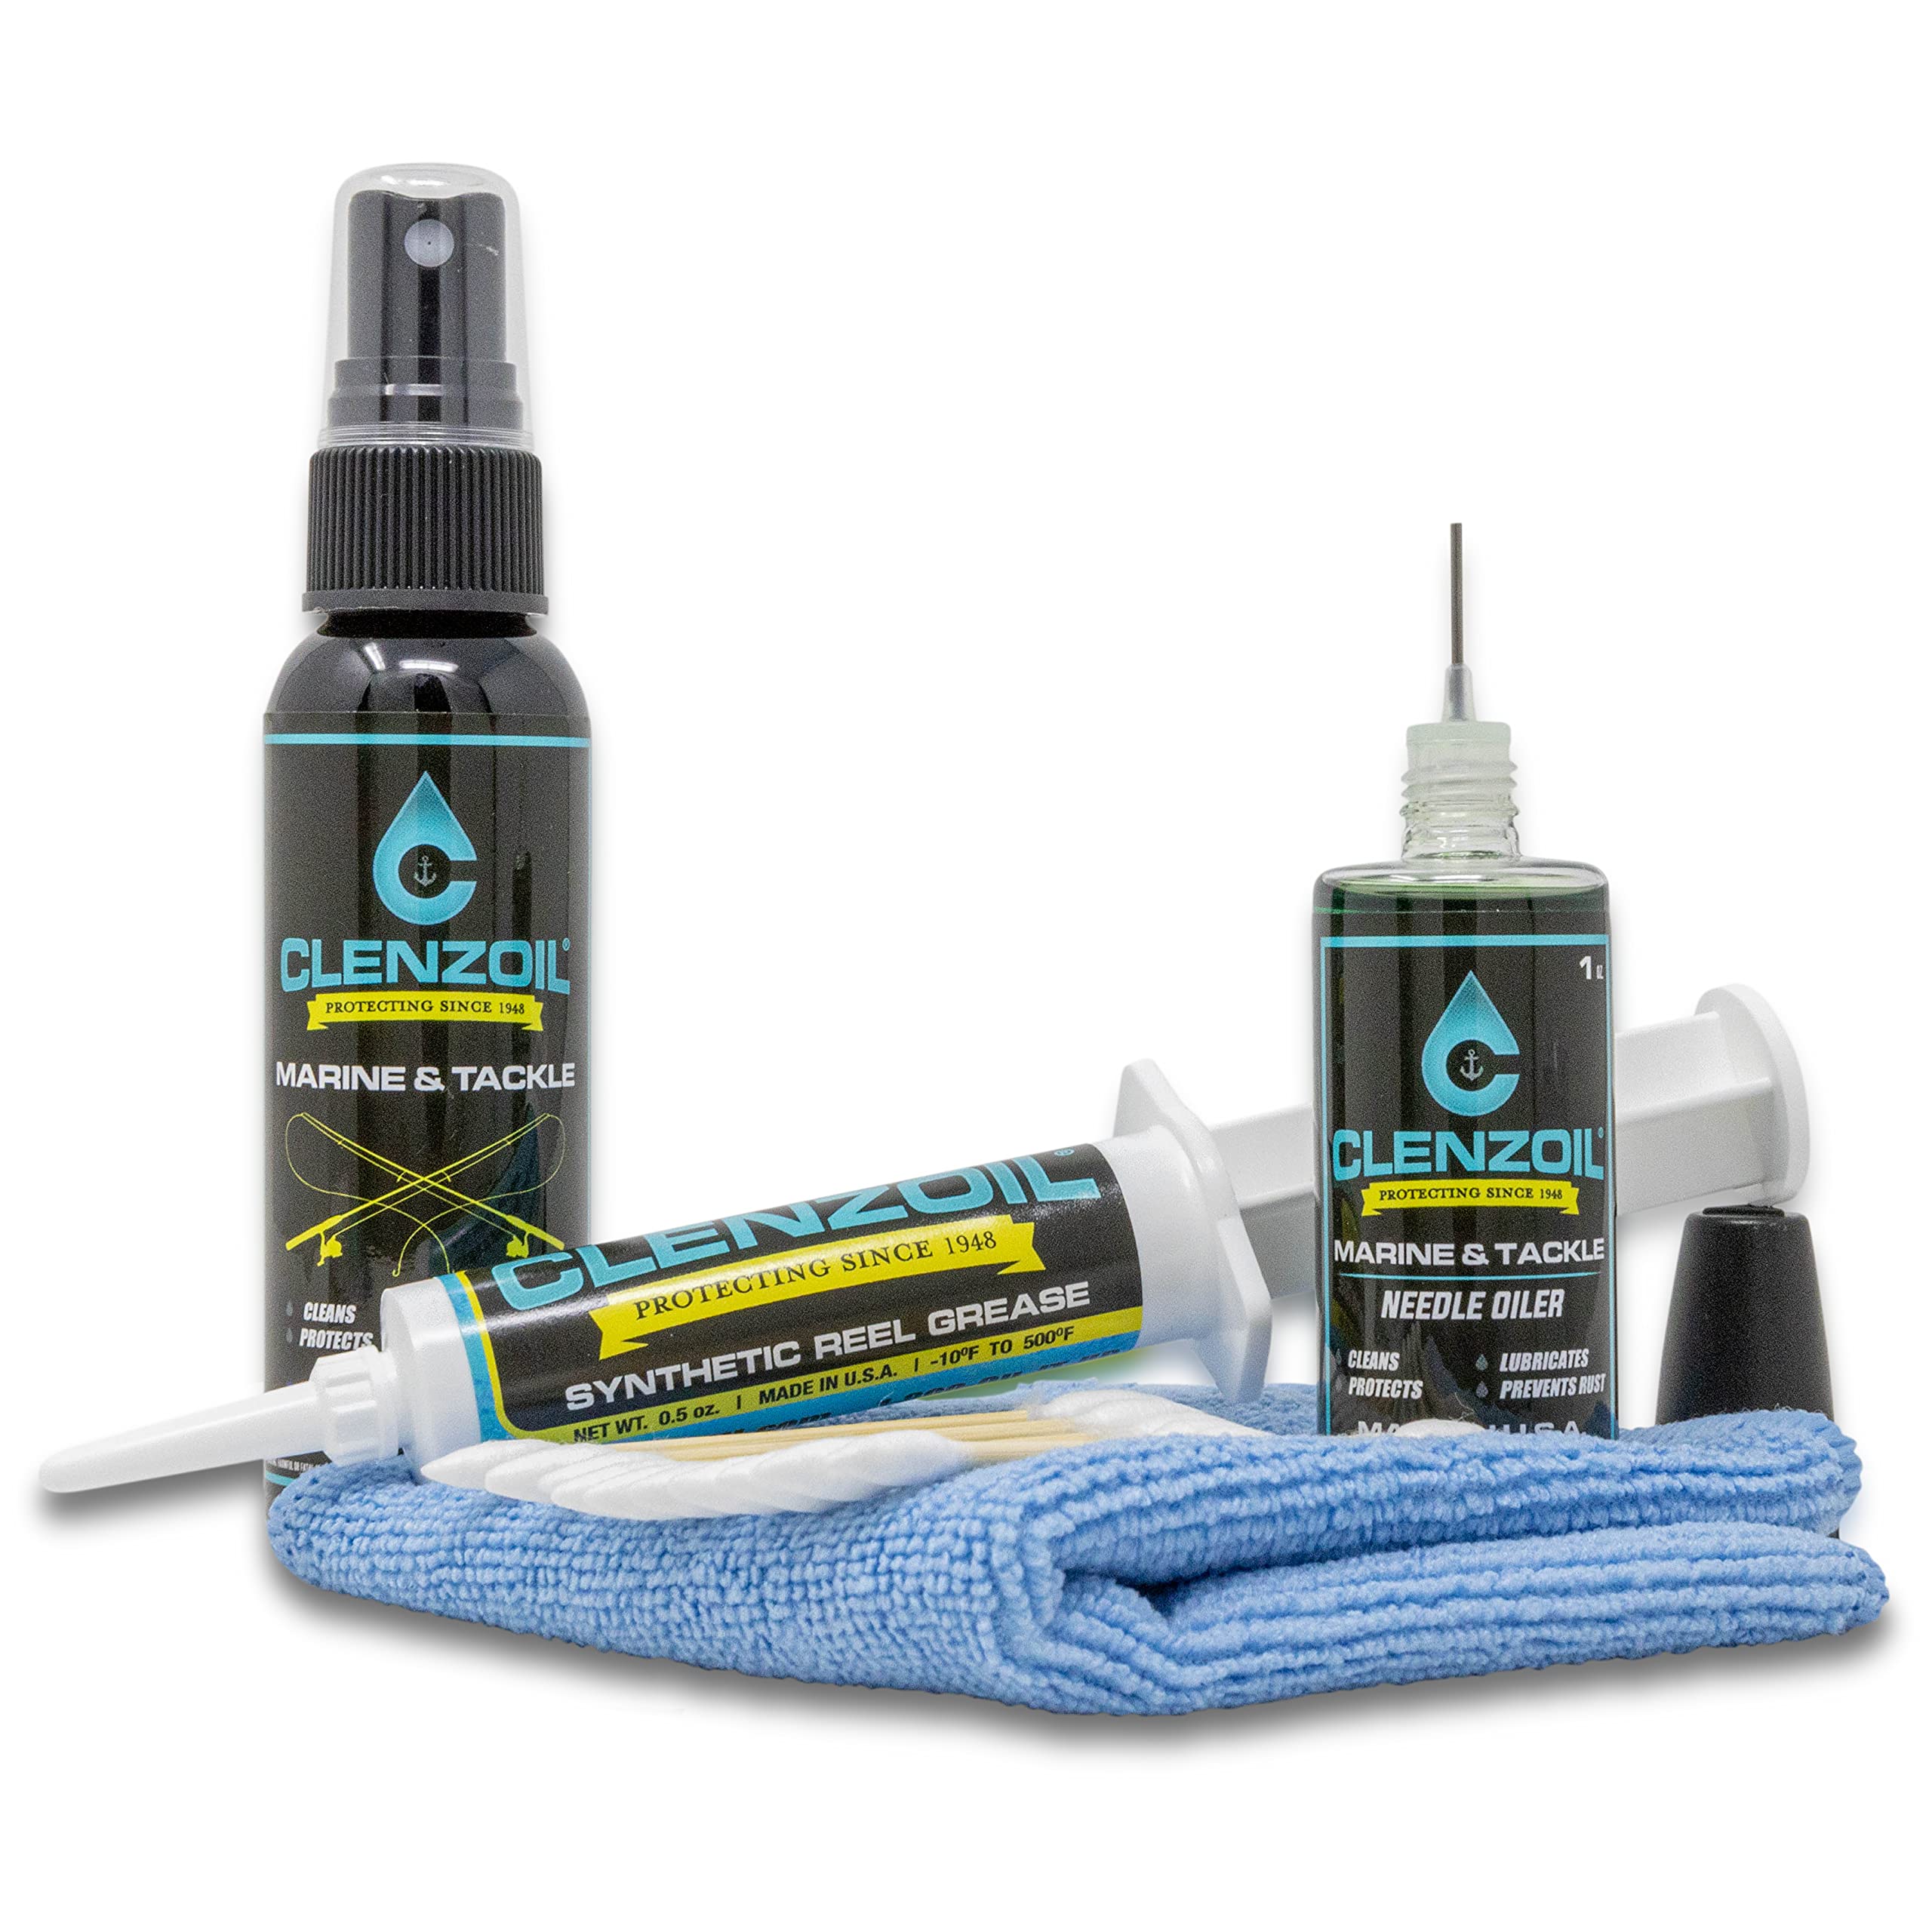 CLENZOIL Marine & Tackle Fishing Reel Oil, Bearing Oil Cleaner & Grease Kit